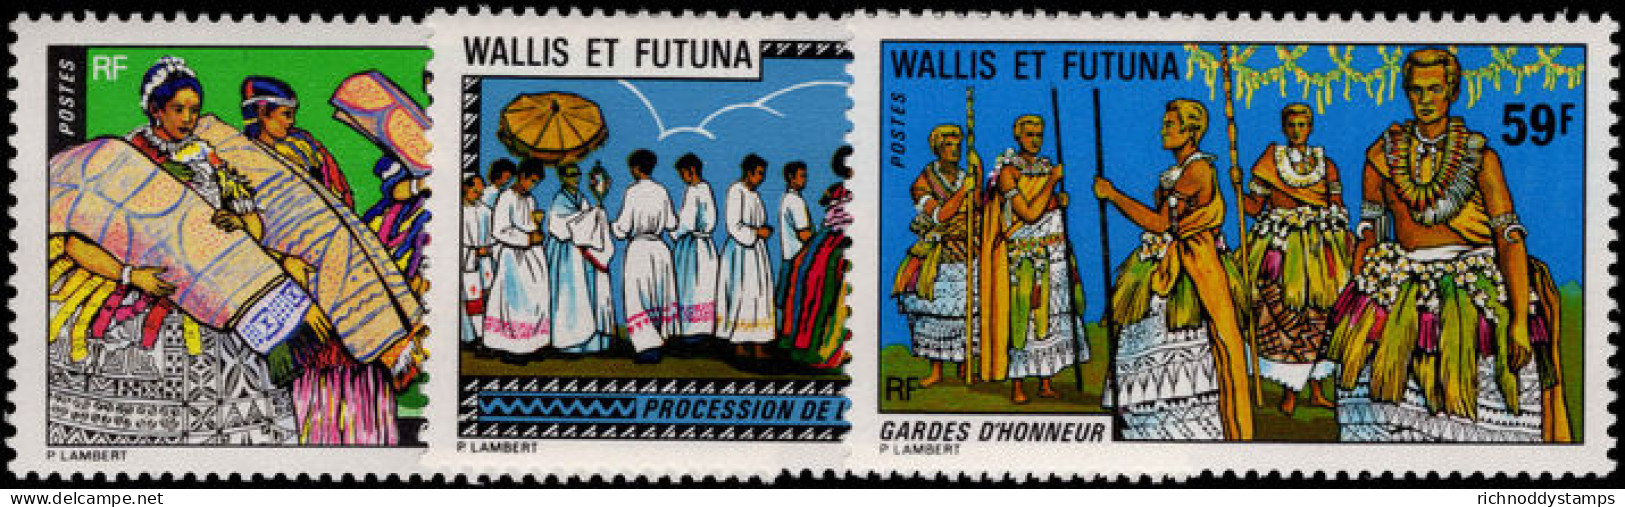 Wallis And Futuna 1978 Costumes And Traditions Unmounted Mint. - Unused Stamps